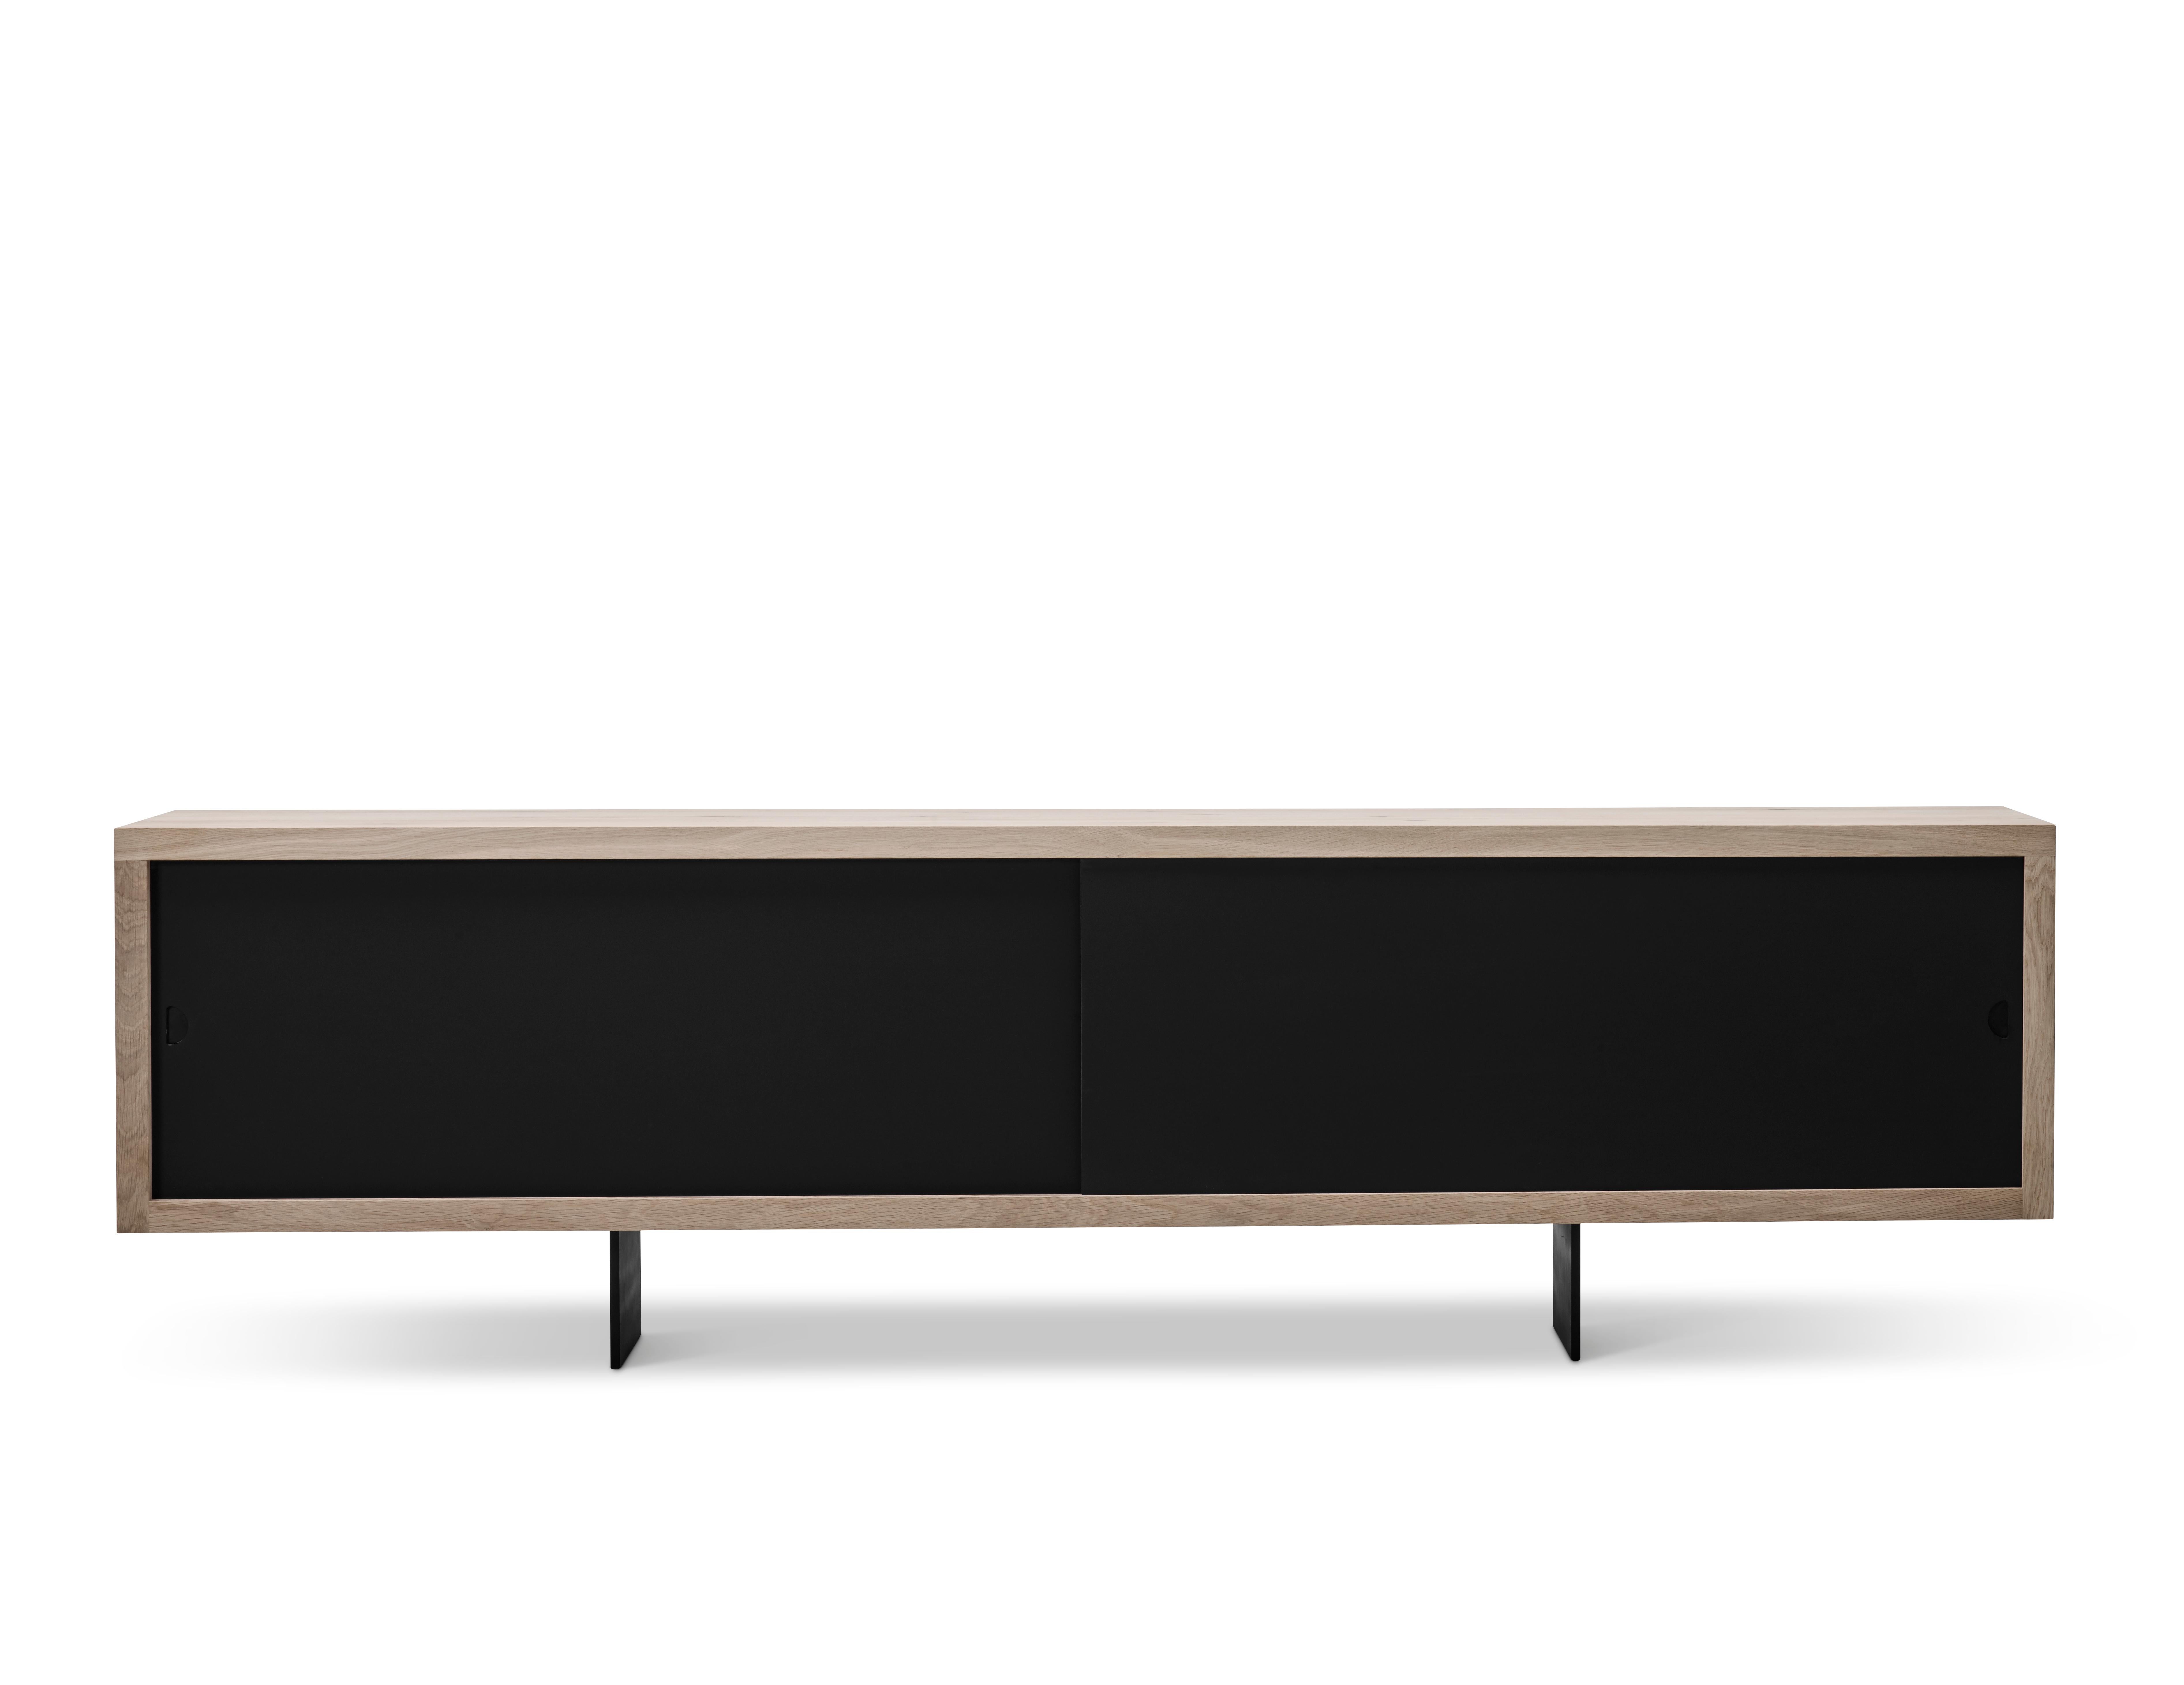 GRAND Sideboard by Jacob Plejdrup for DK3, 2016

Sideboard with sliding doors, available in castoro, beige, black or white.
Dimensions: H 68 x 50 x 240

---
dk3 is known for the large plank tables, so it was obvious for designer and dk3